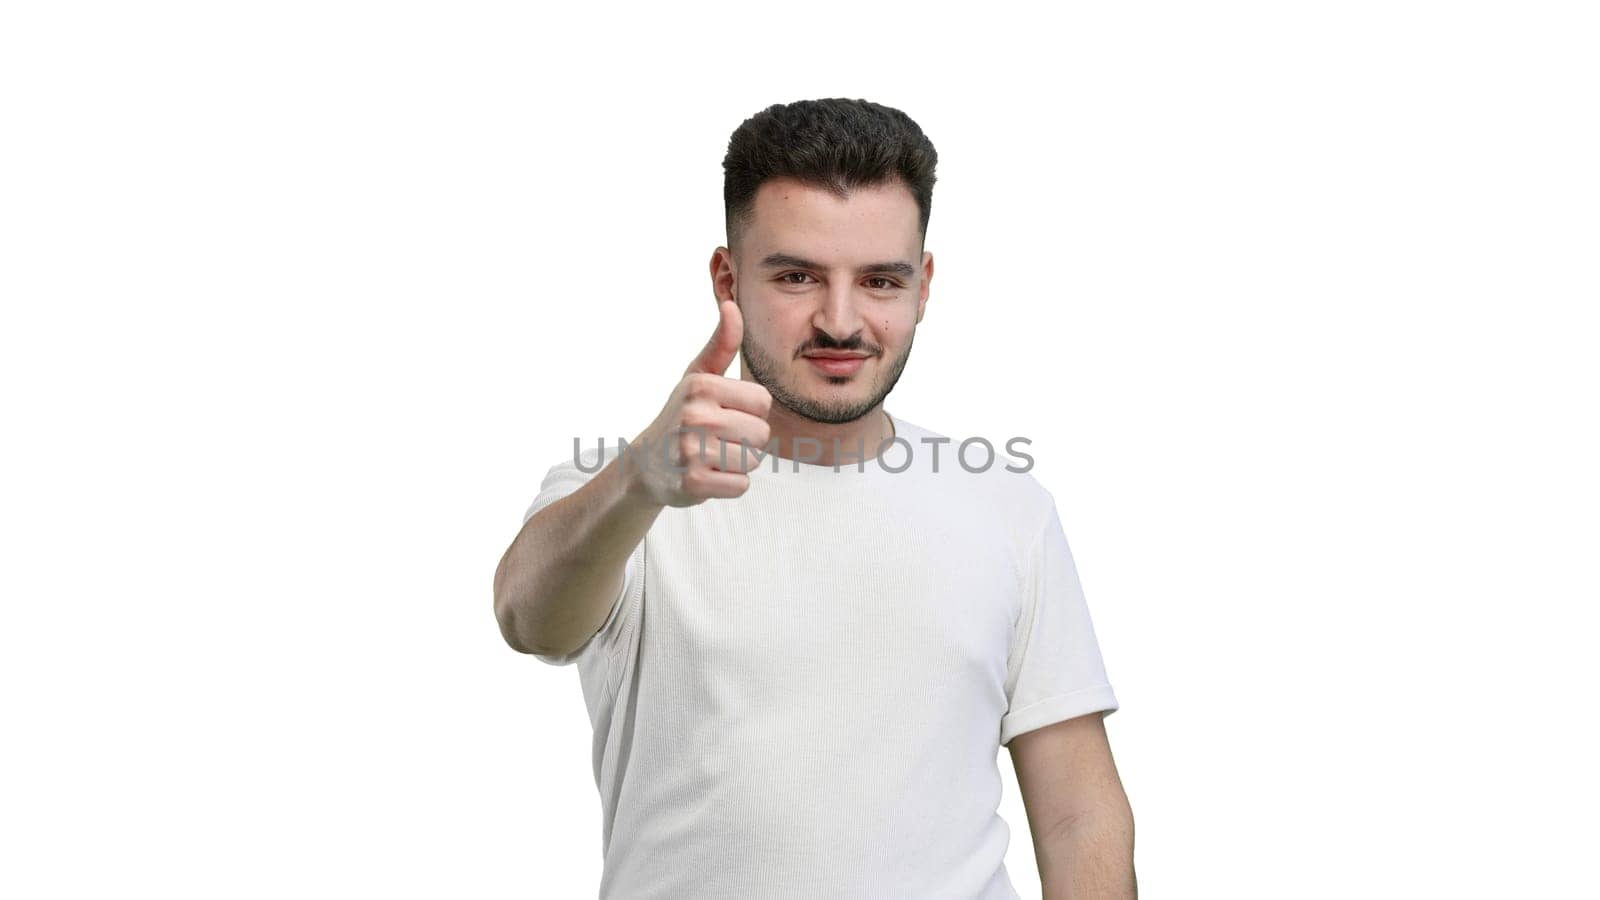 A man, close-up, on a white background, shows a thumbs up.